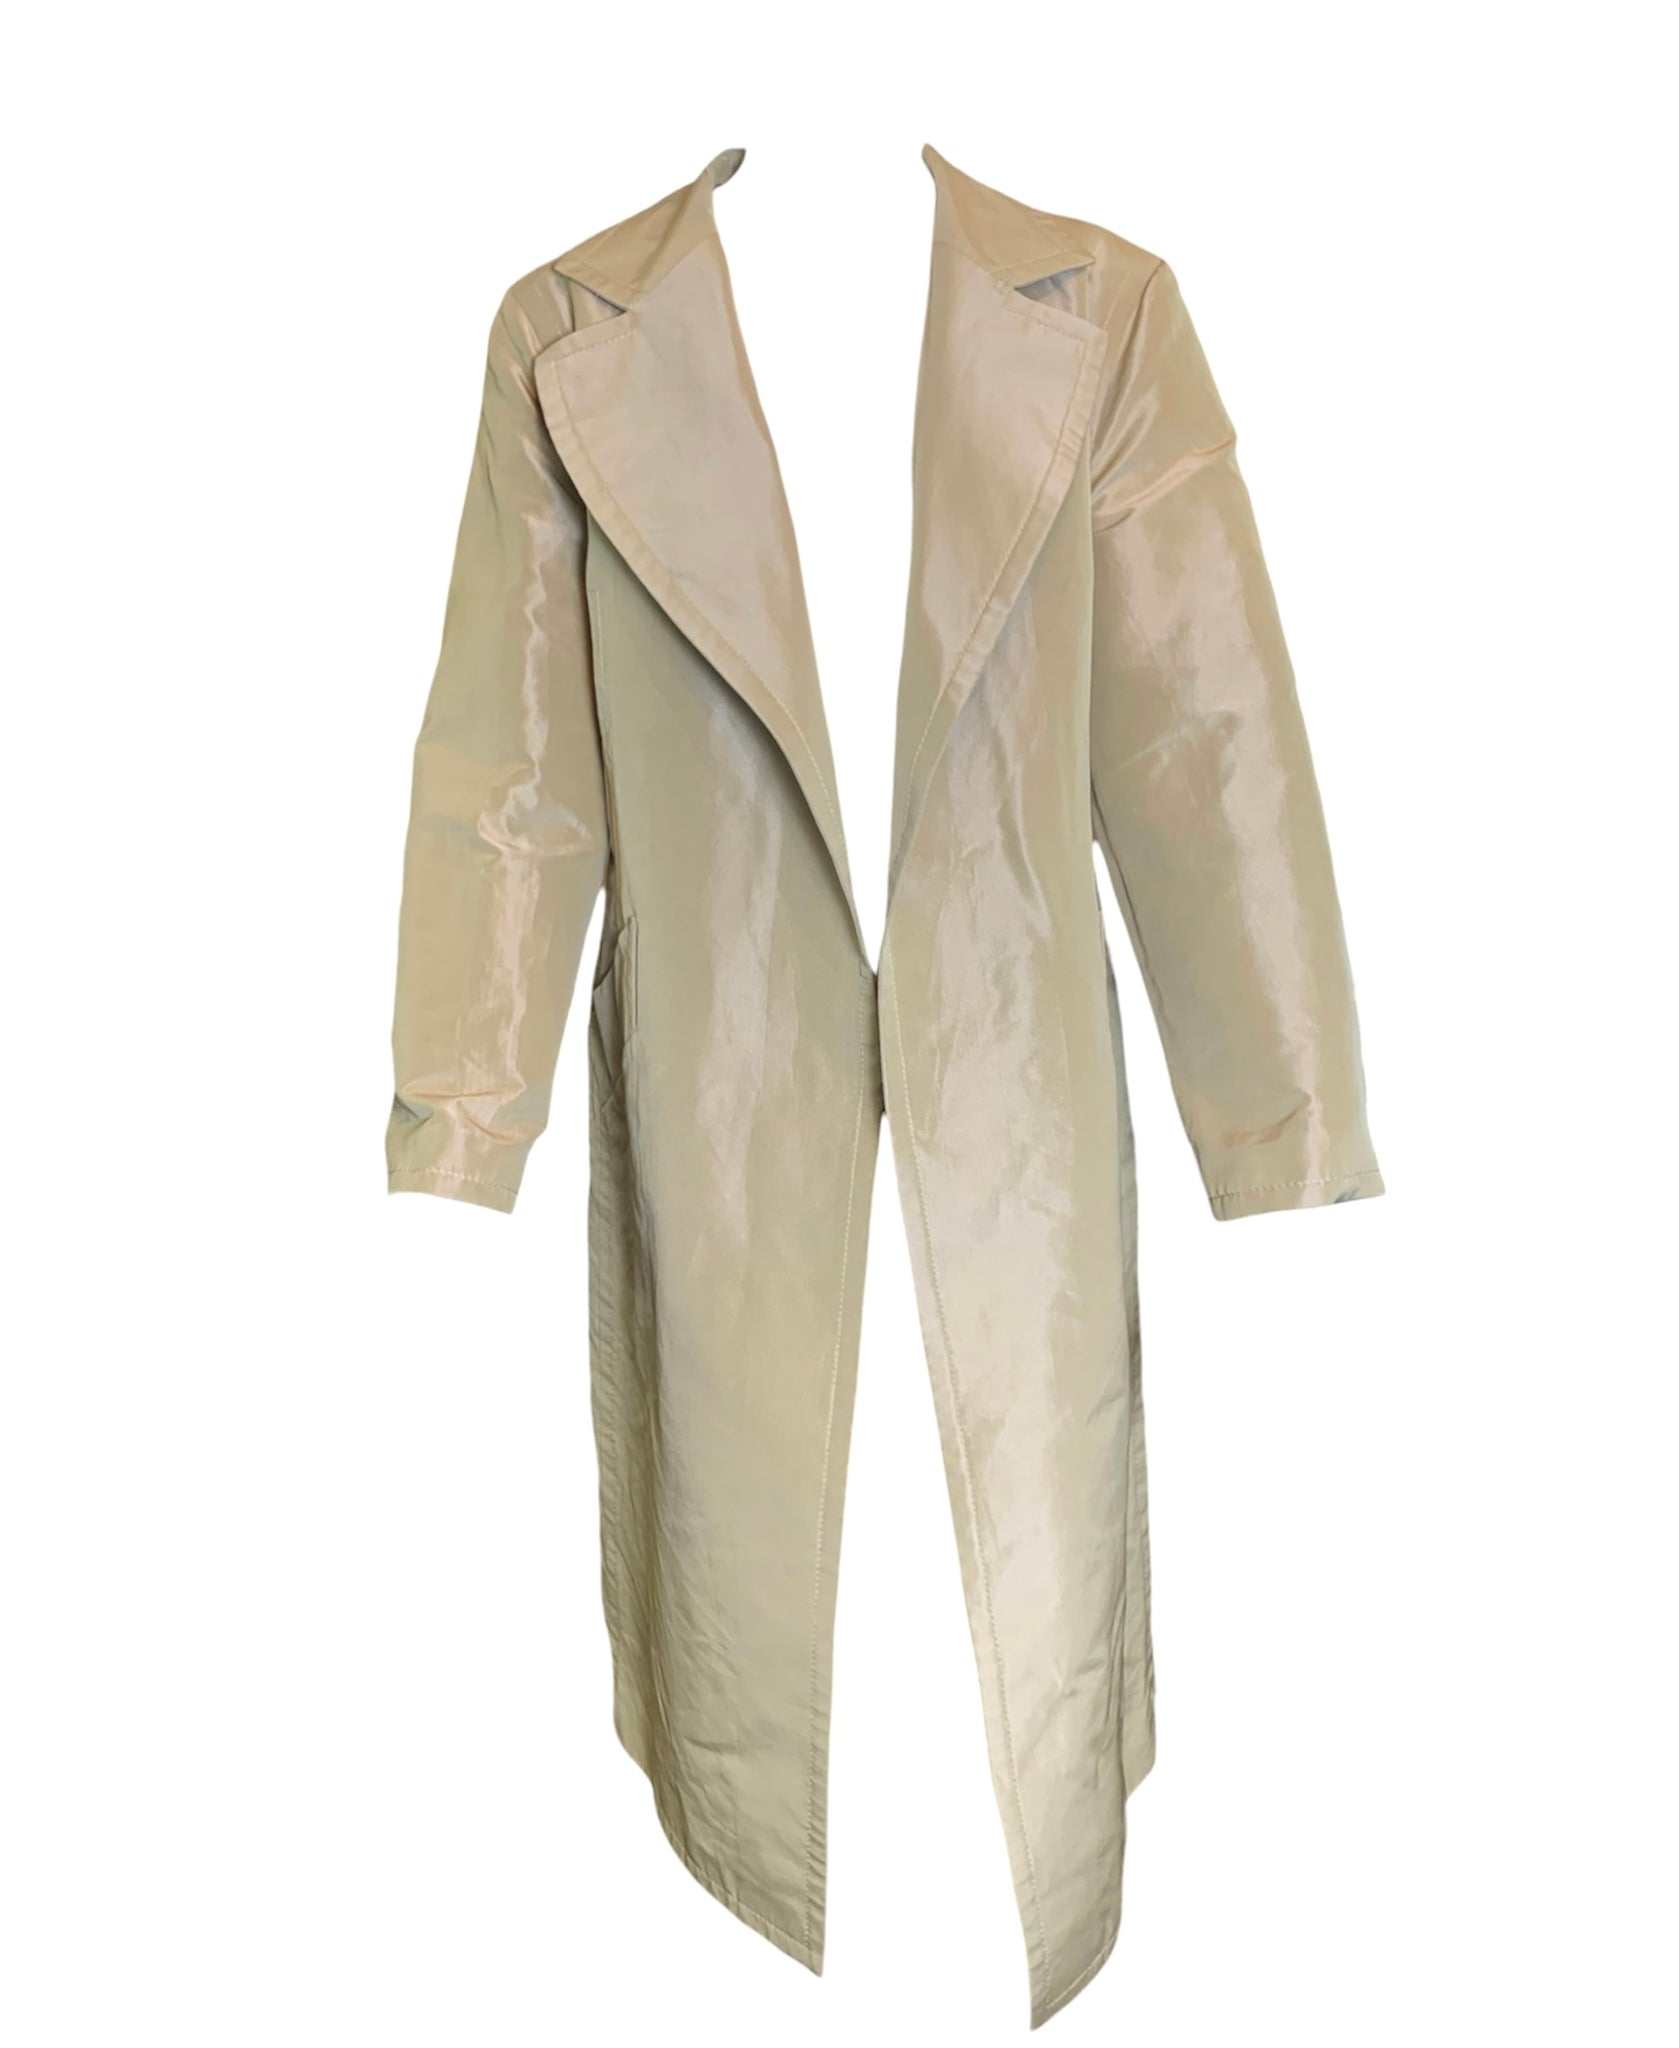 Gianfranco Ferre 1990s Sand Colored  Wrap Trench Coat OPEN FRONT 4 of 6